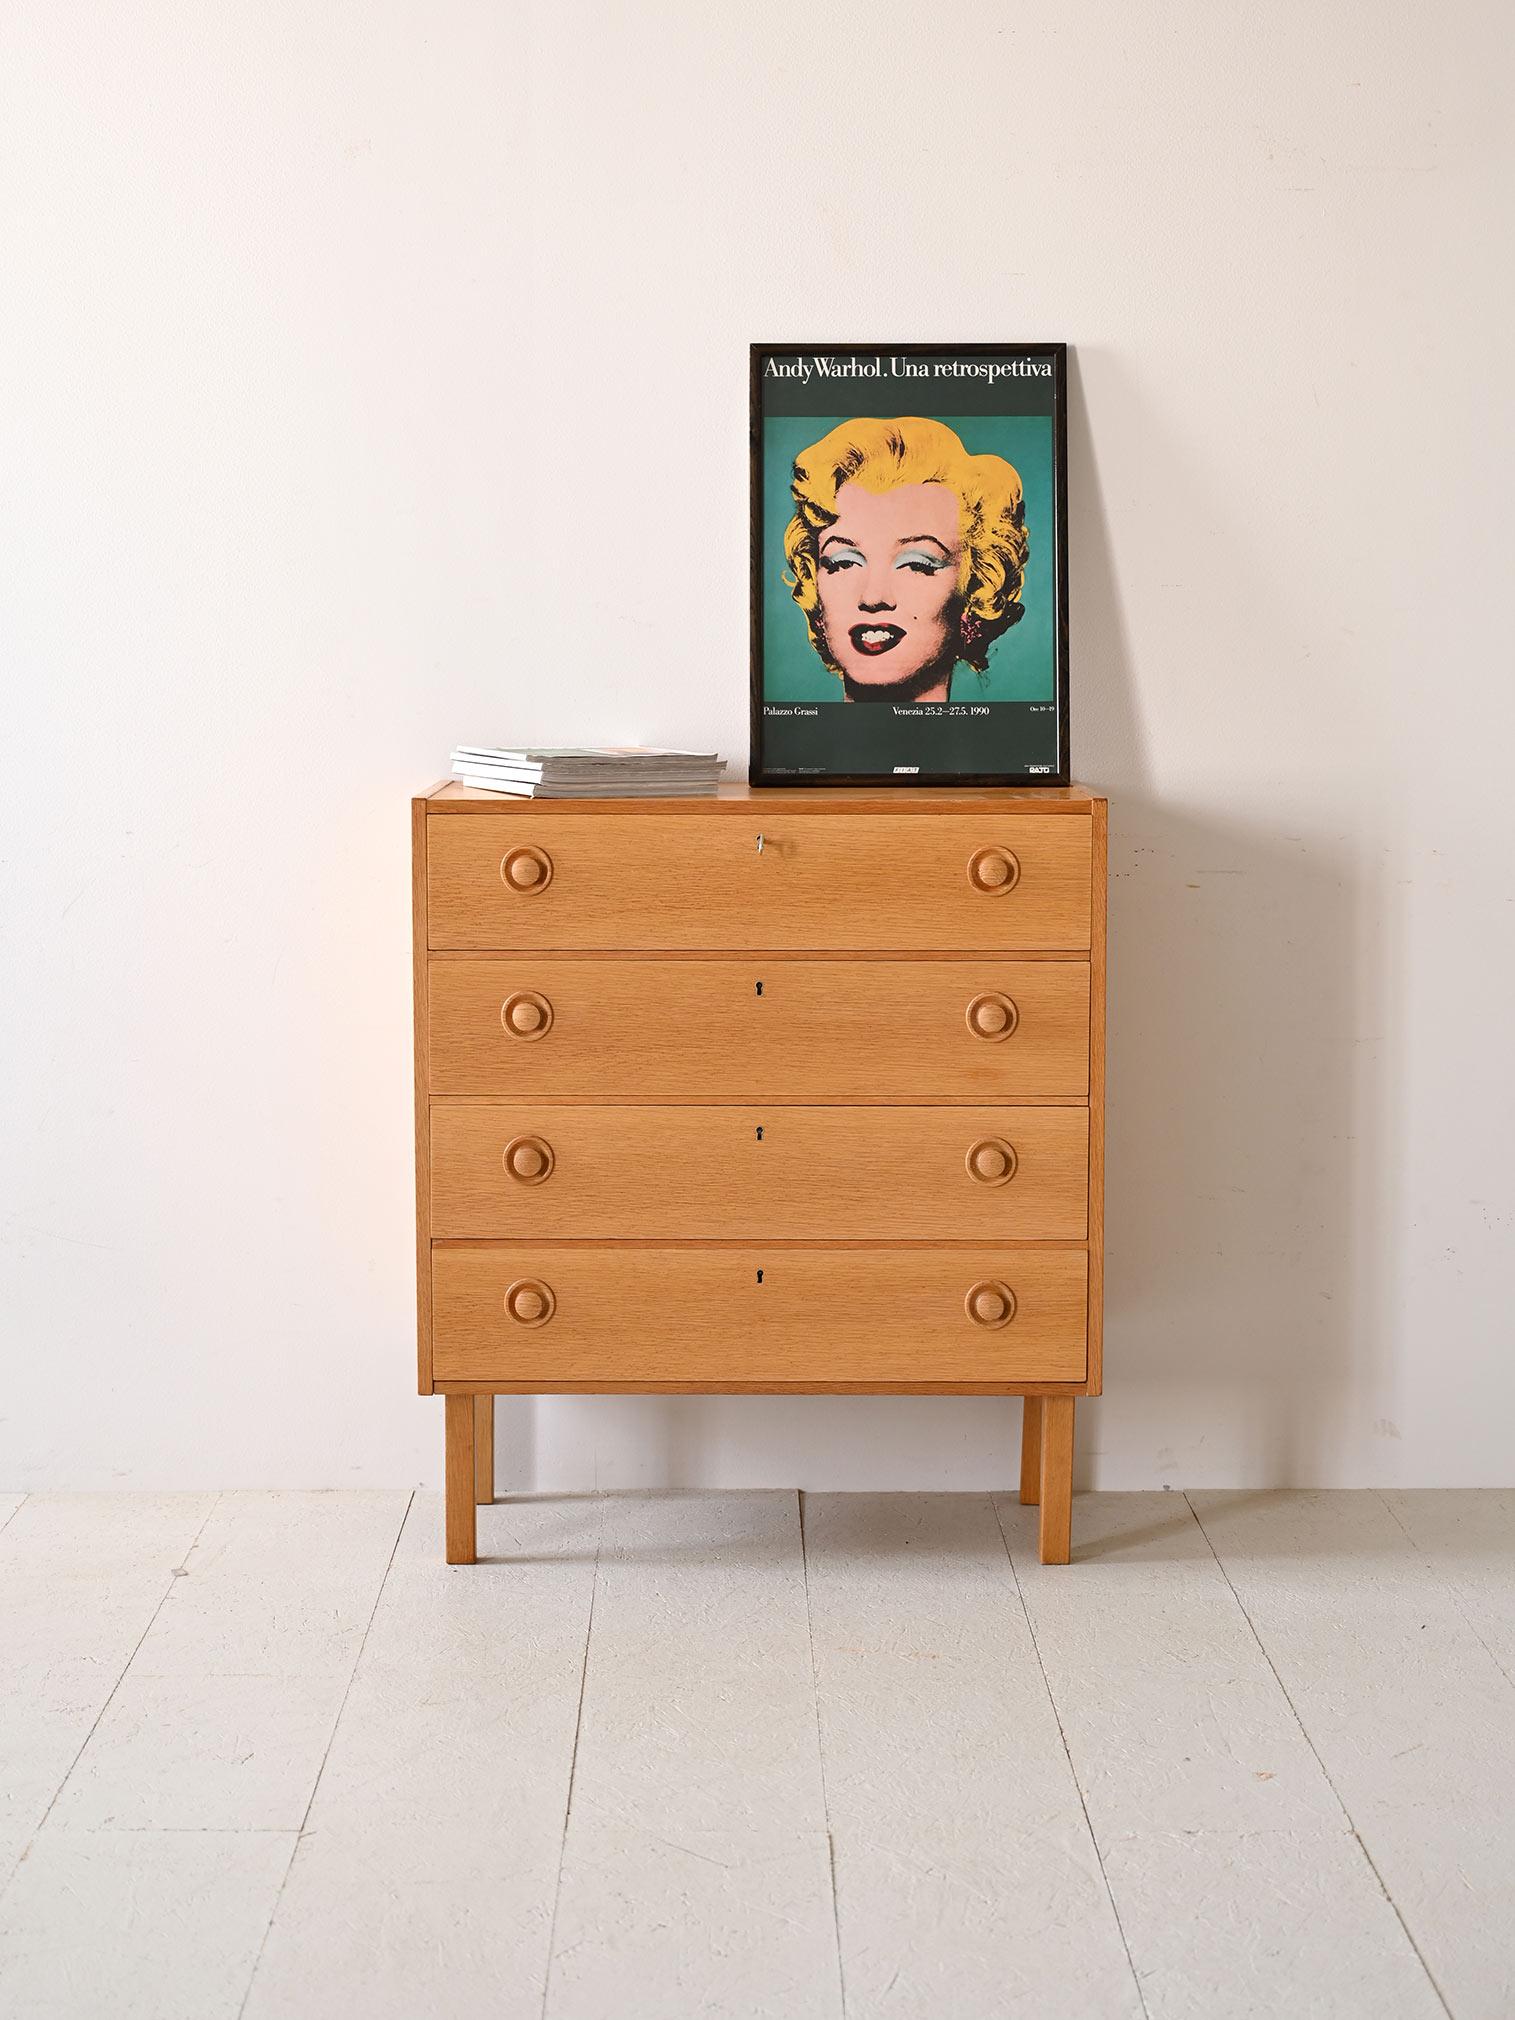 Scandinavian chest of drawers with four drawers.

Simple and functional, this piece features square, regular shapes in both frame and legs, contrasting with the protruding, rounded handle that lends character to the cabinet.

The warm tone of teak